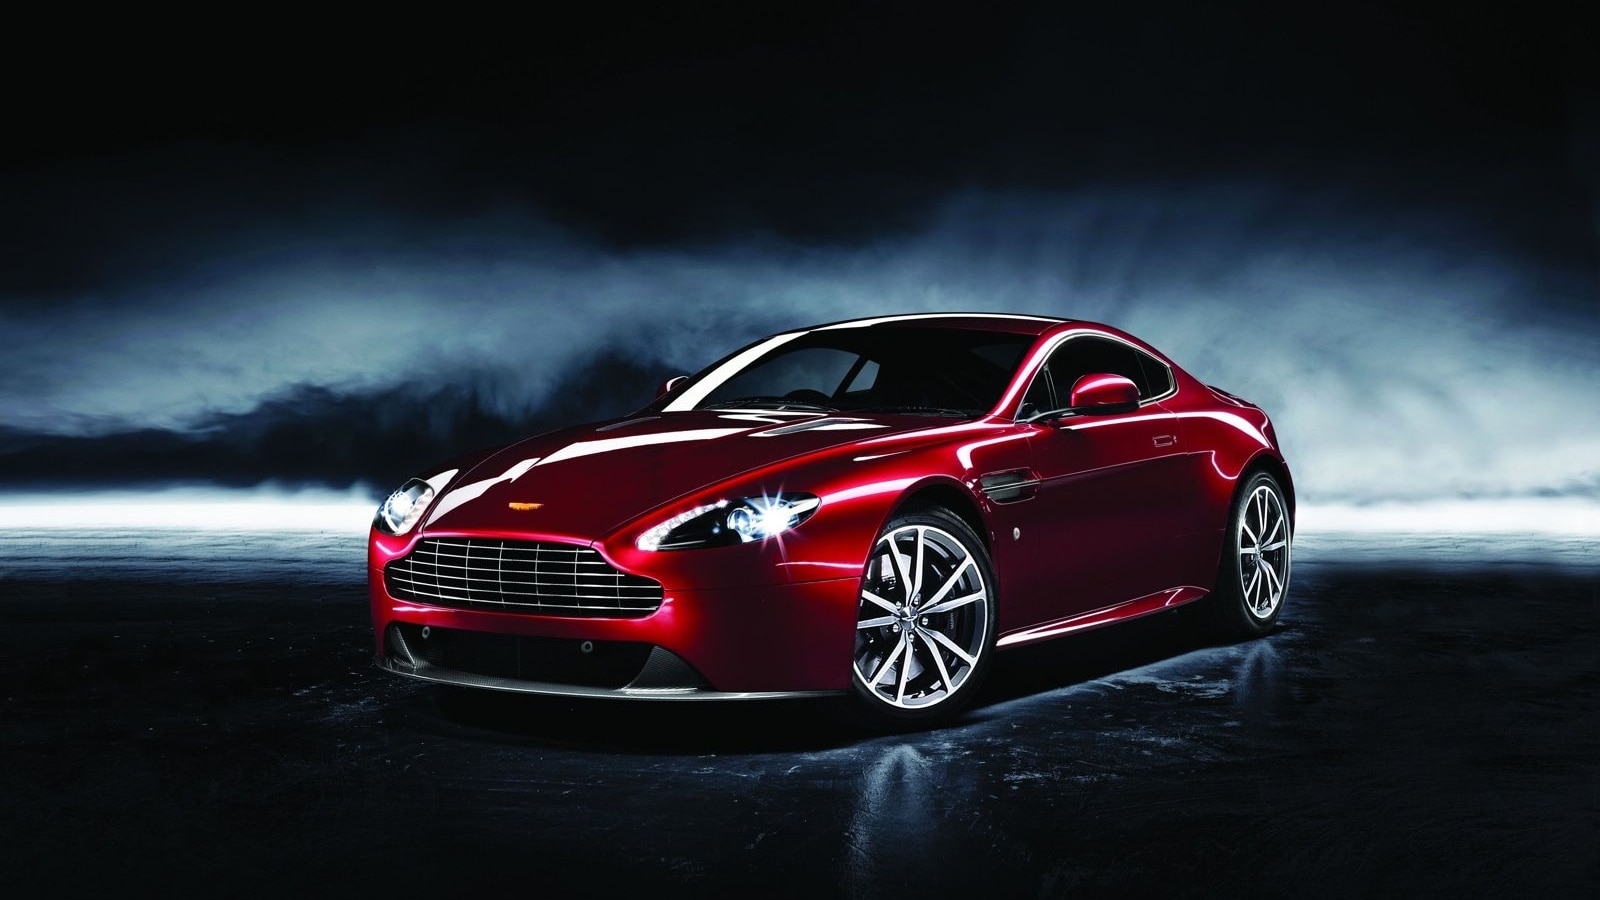 Aston Martin's 'Dragon 88' Special Editions for the Chinese market.